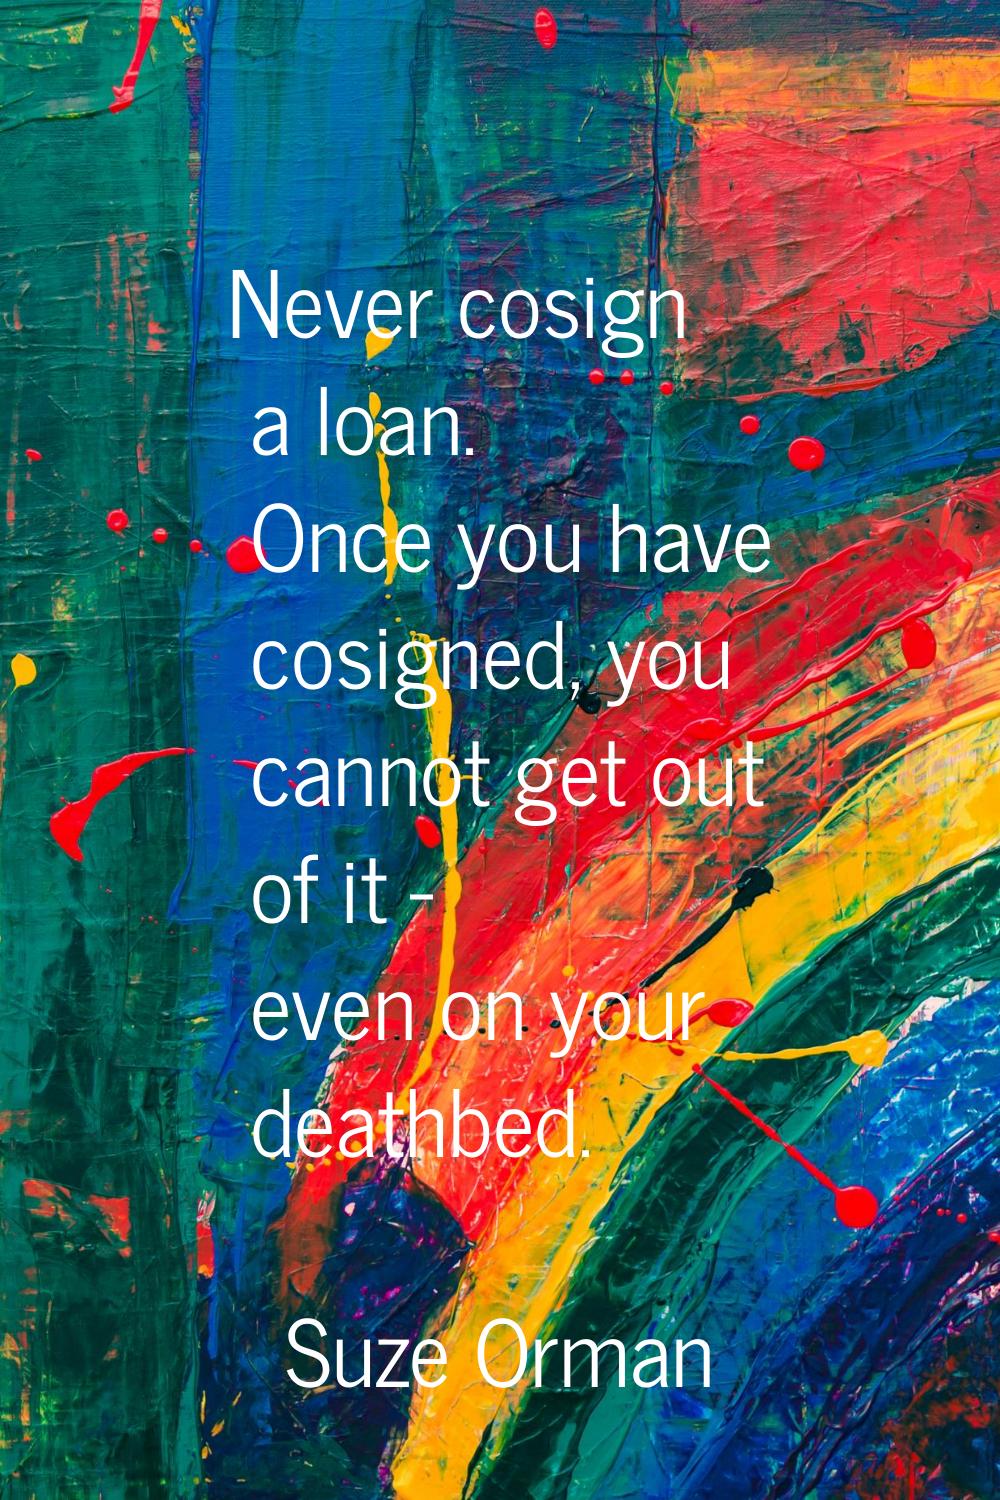 Never cosign a loan. Once you have cosigned, you cannot get out of it - even on your deathbed.